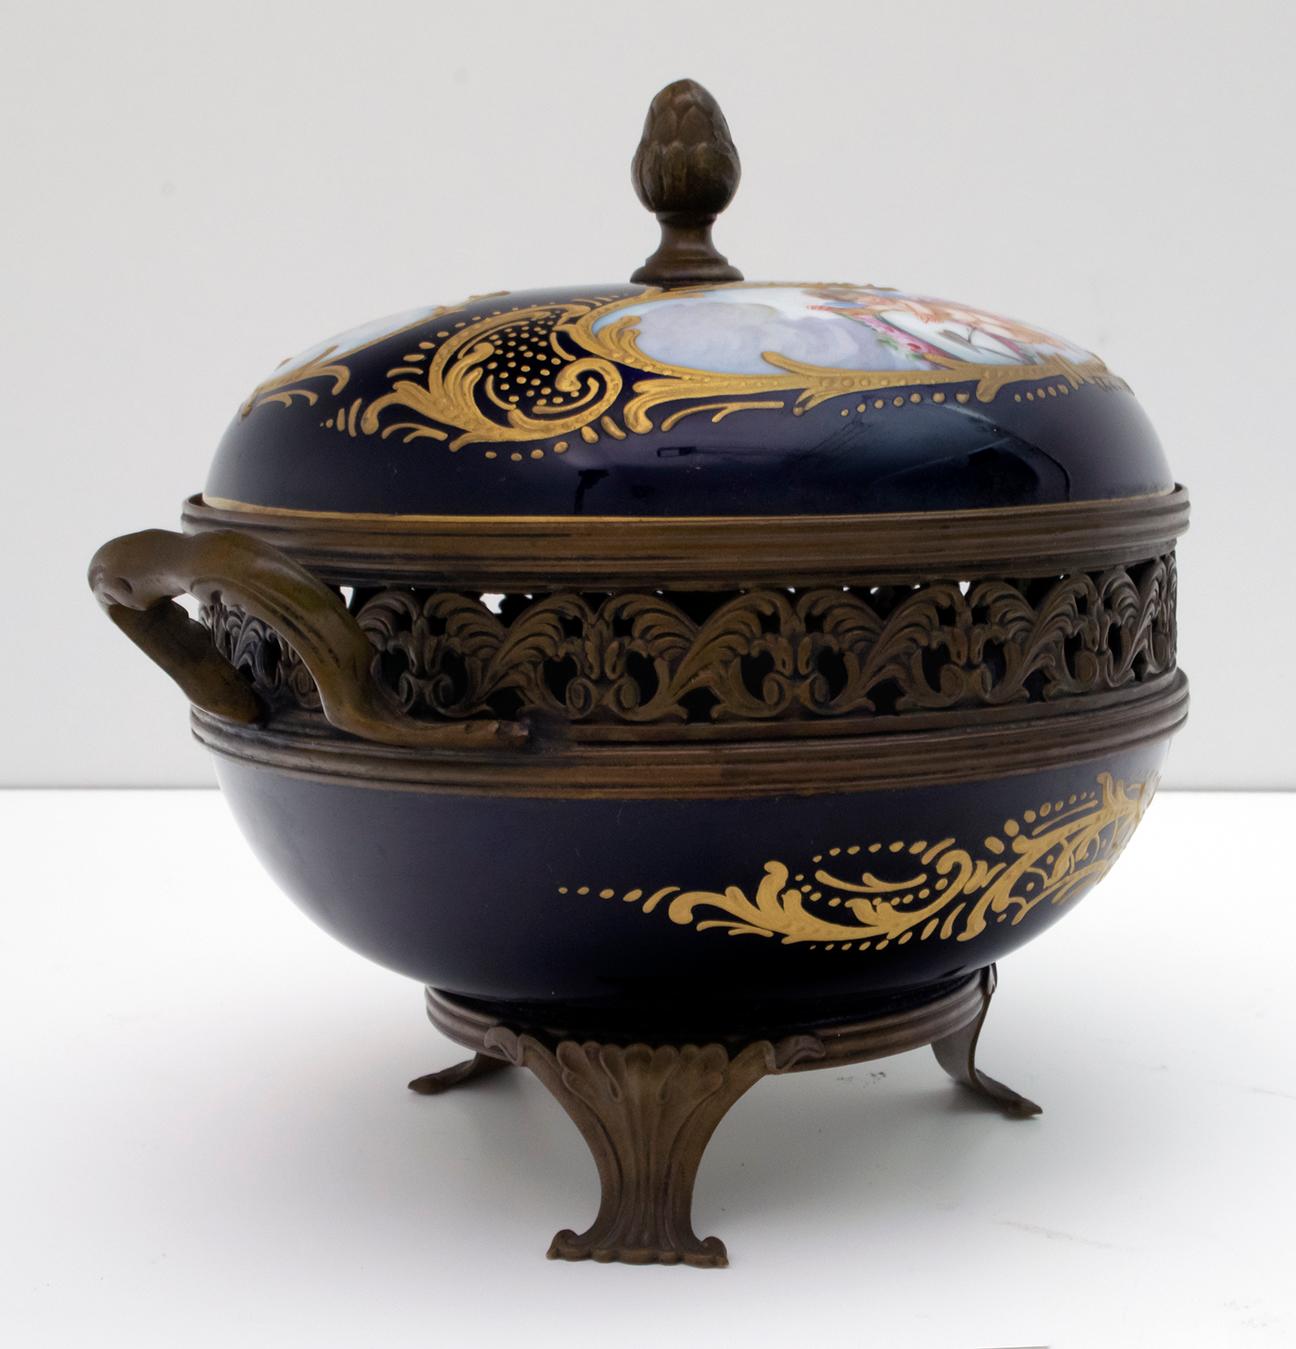 Patinated Signed E. Froger 19th Century French Porcelain Potpourri by Sevres, 1880 For Sale